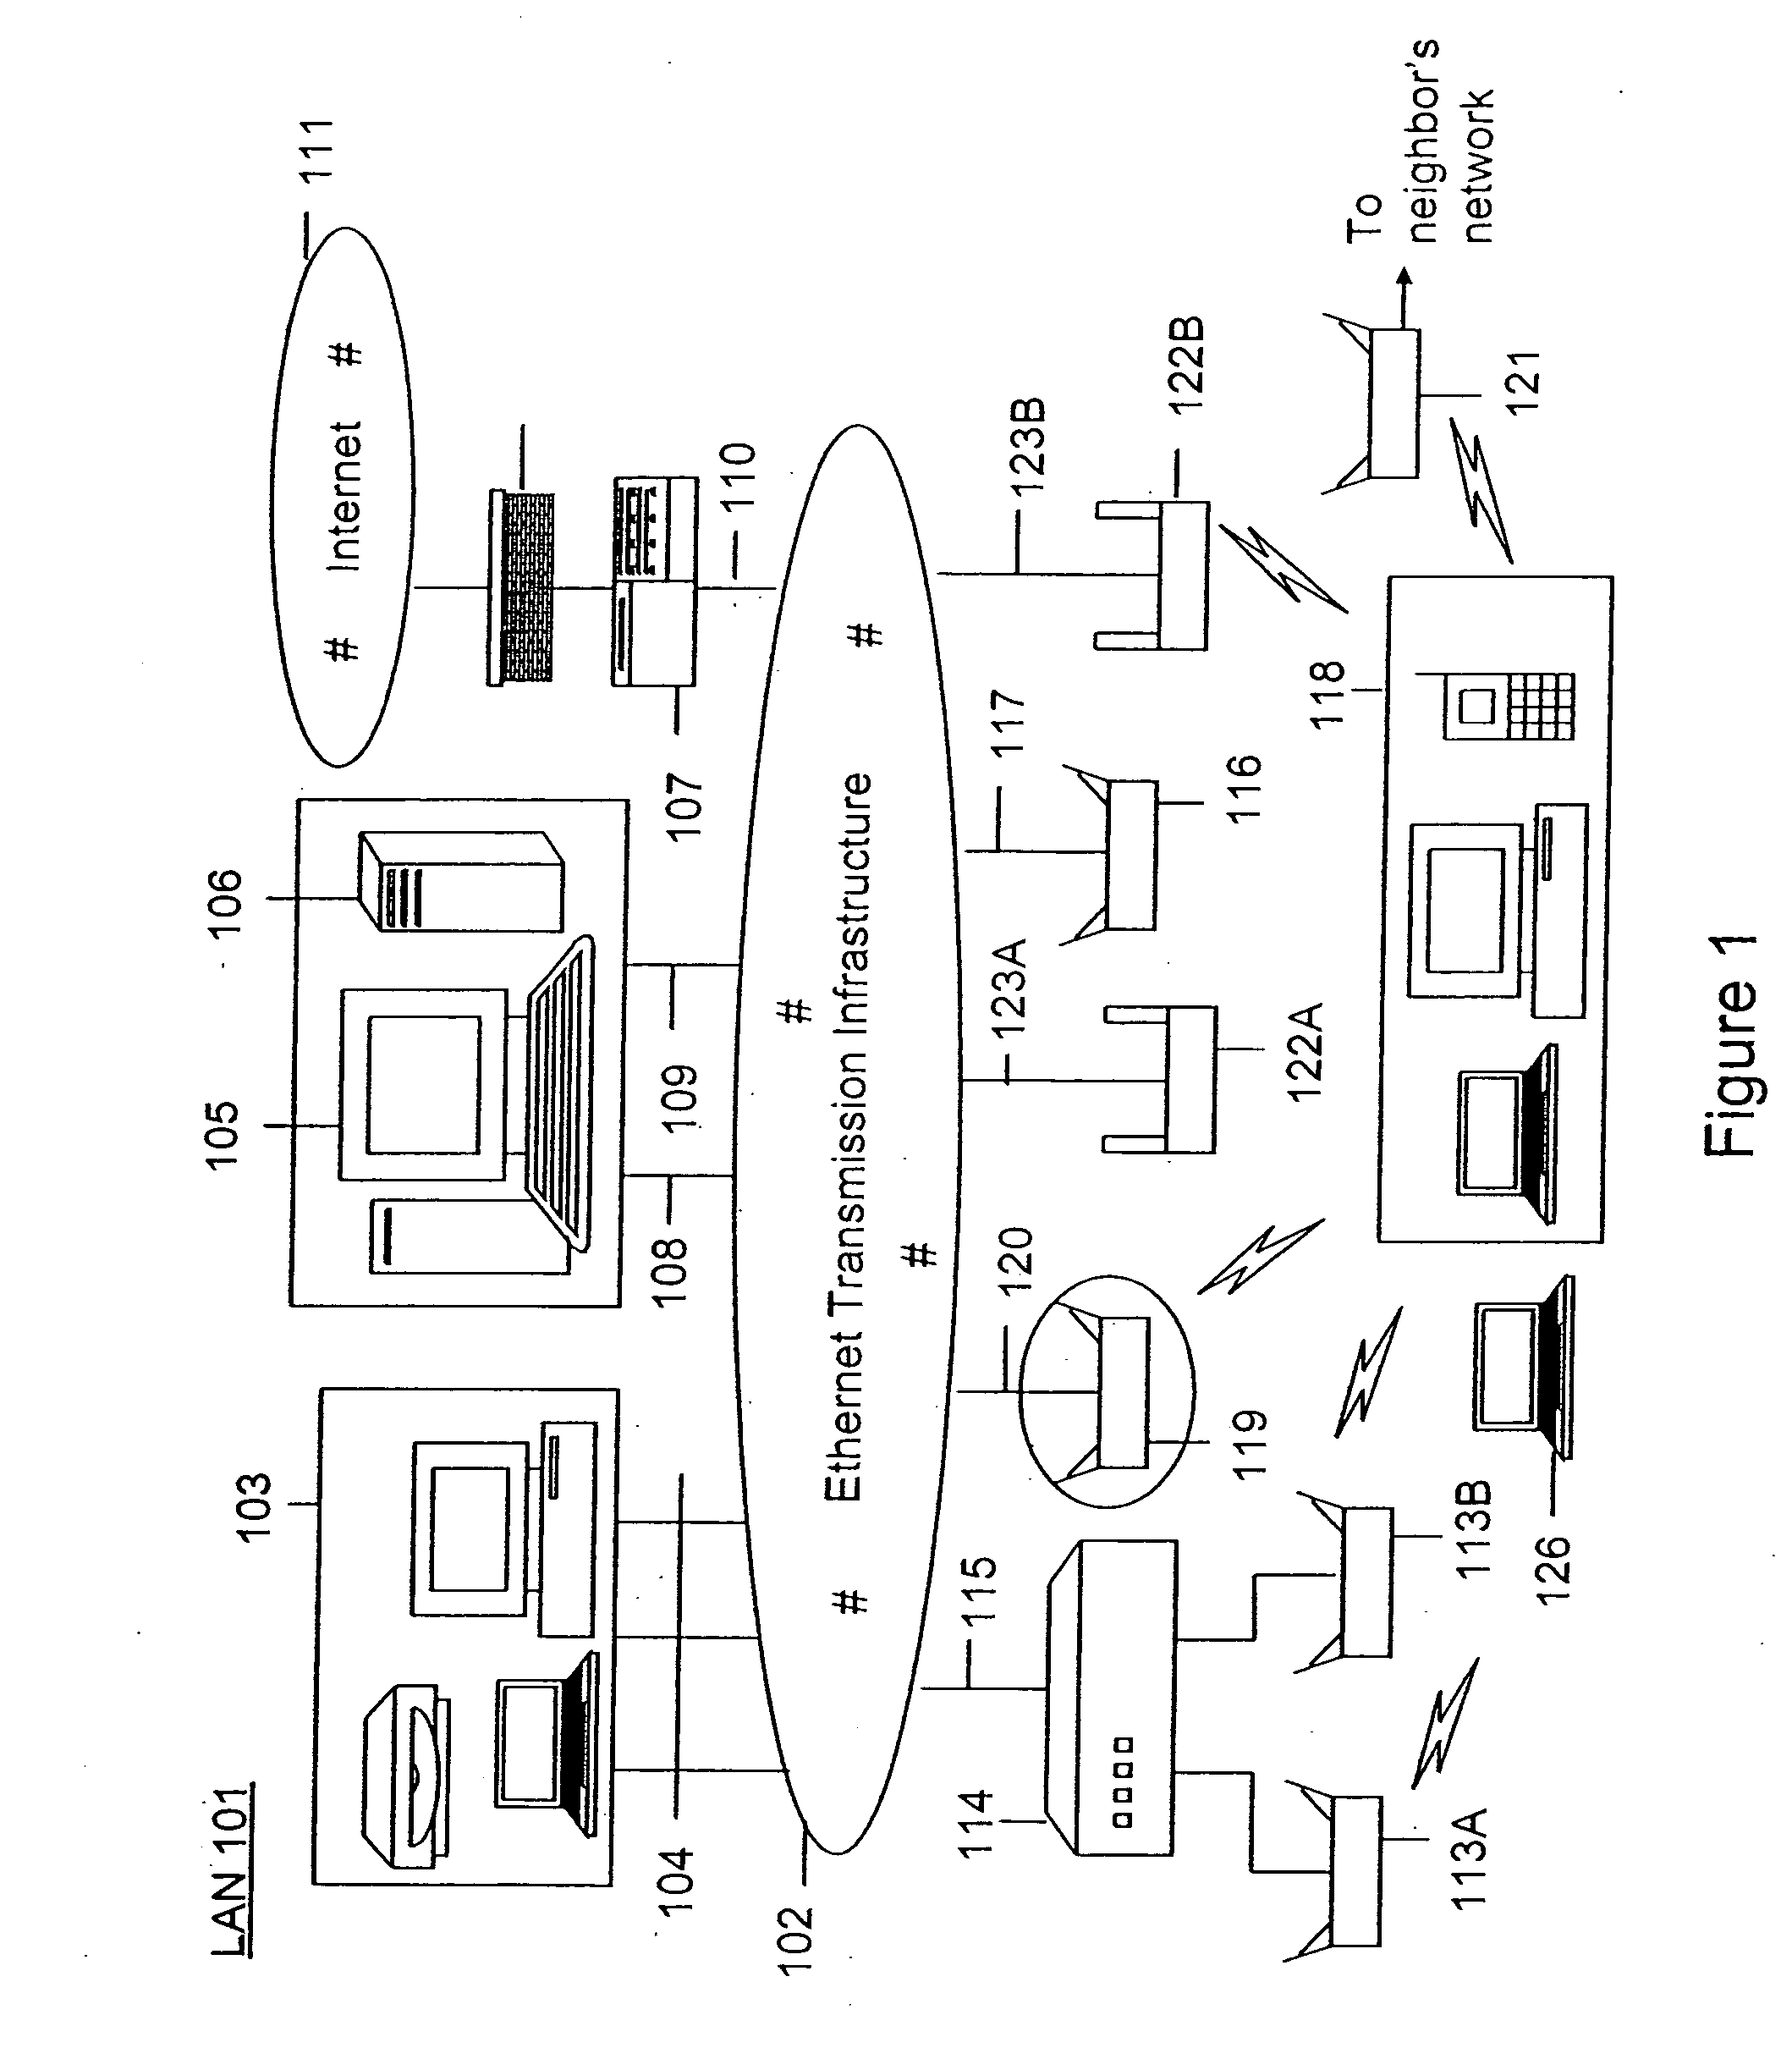 Automated sniffer apparatus and method for monitoring computer systems for unauthorized access